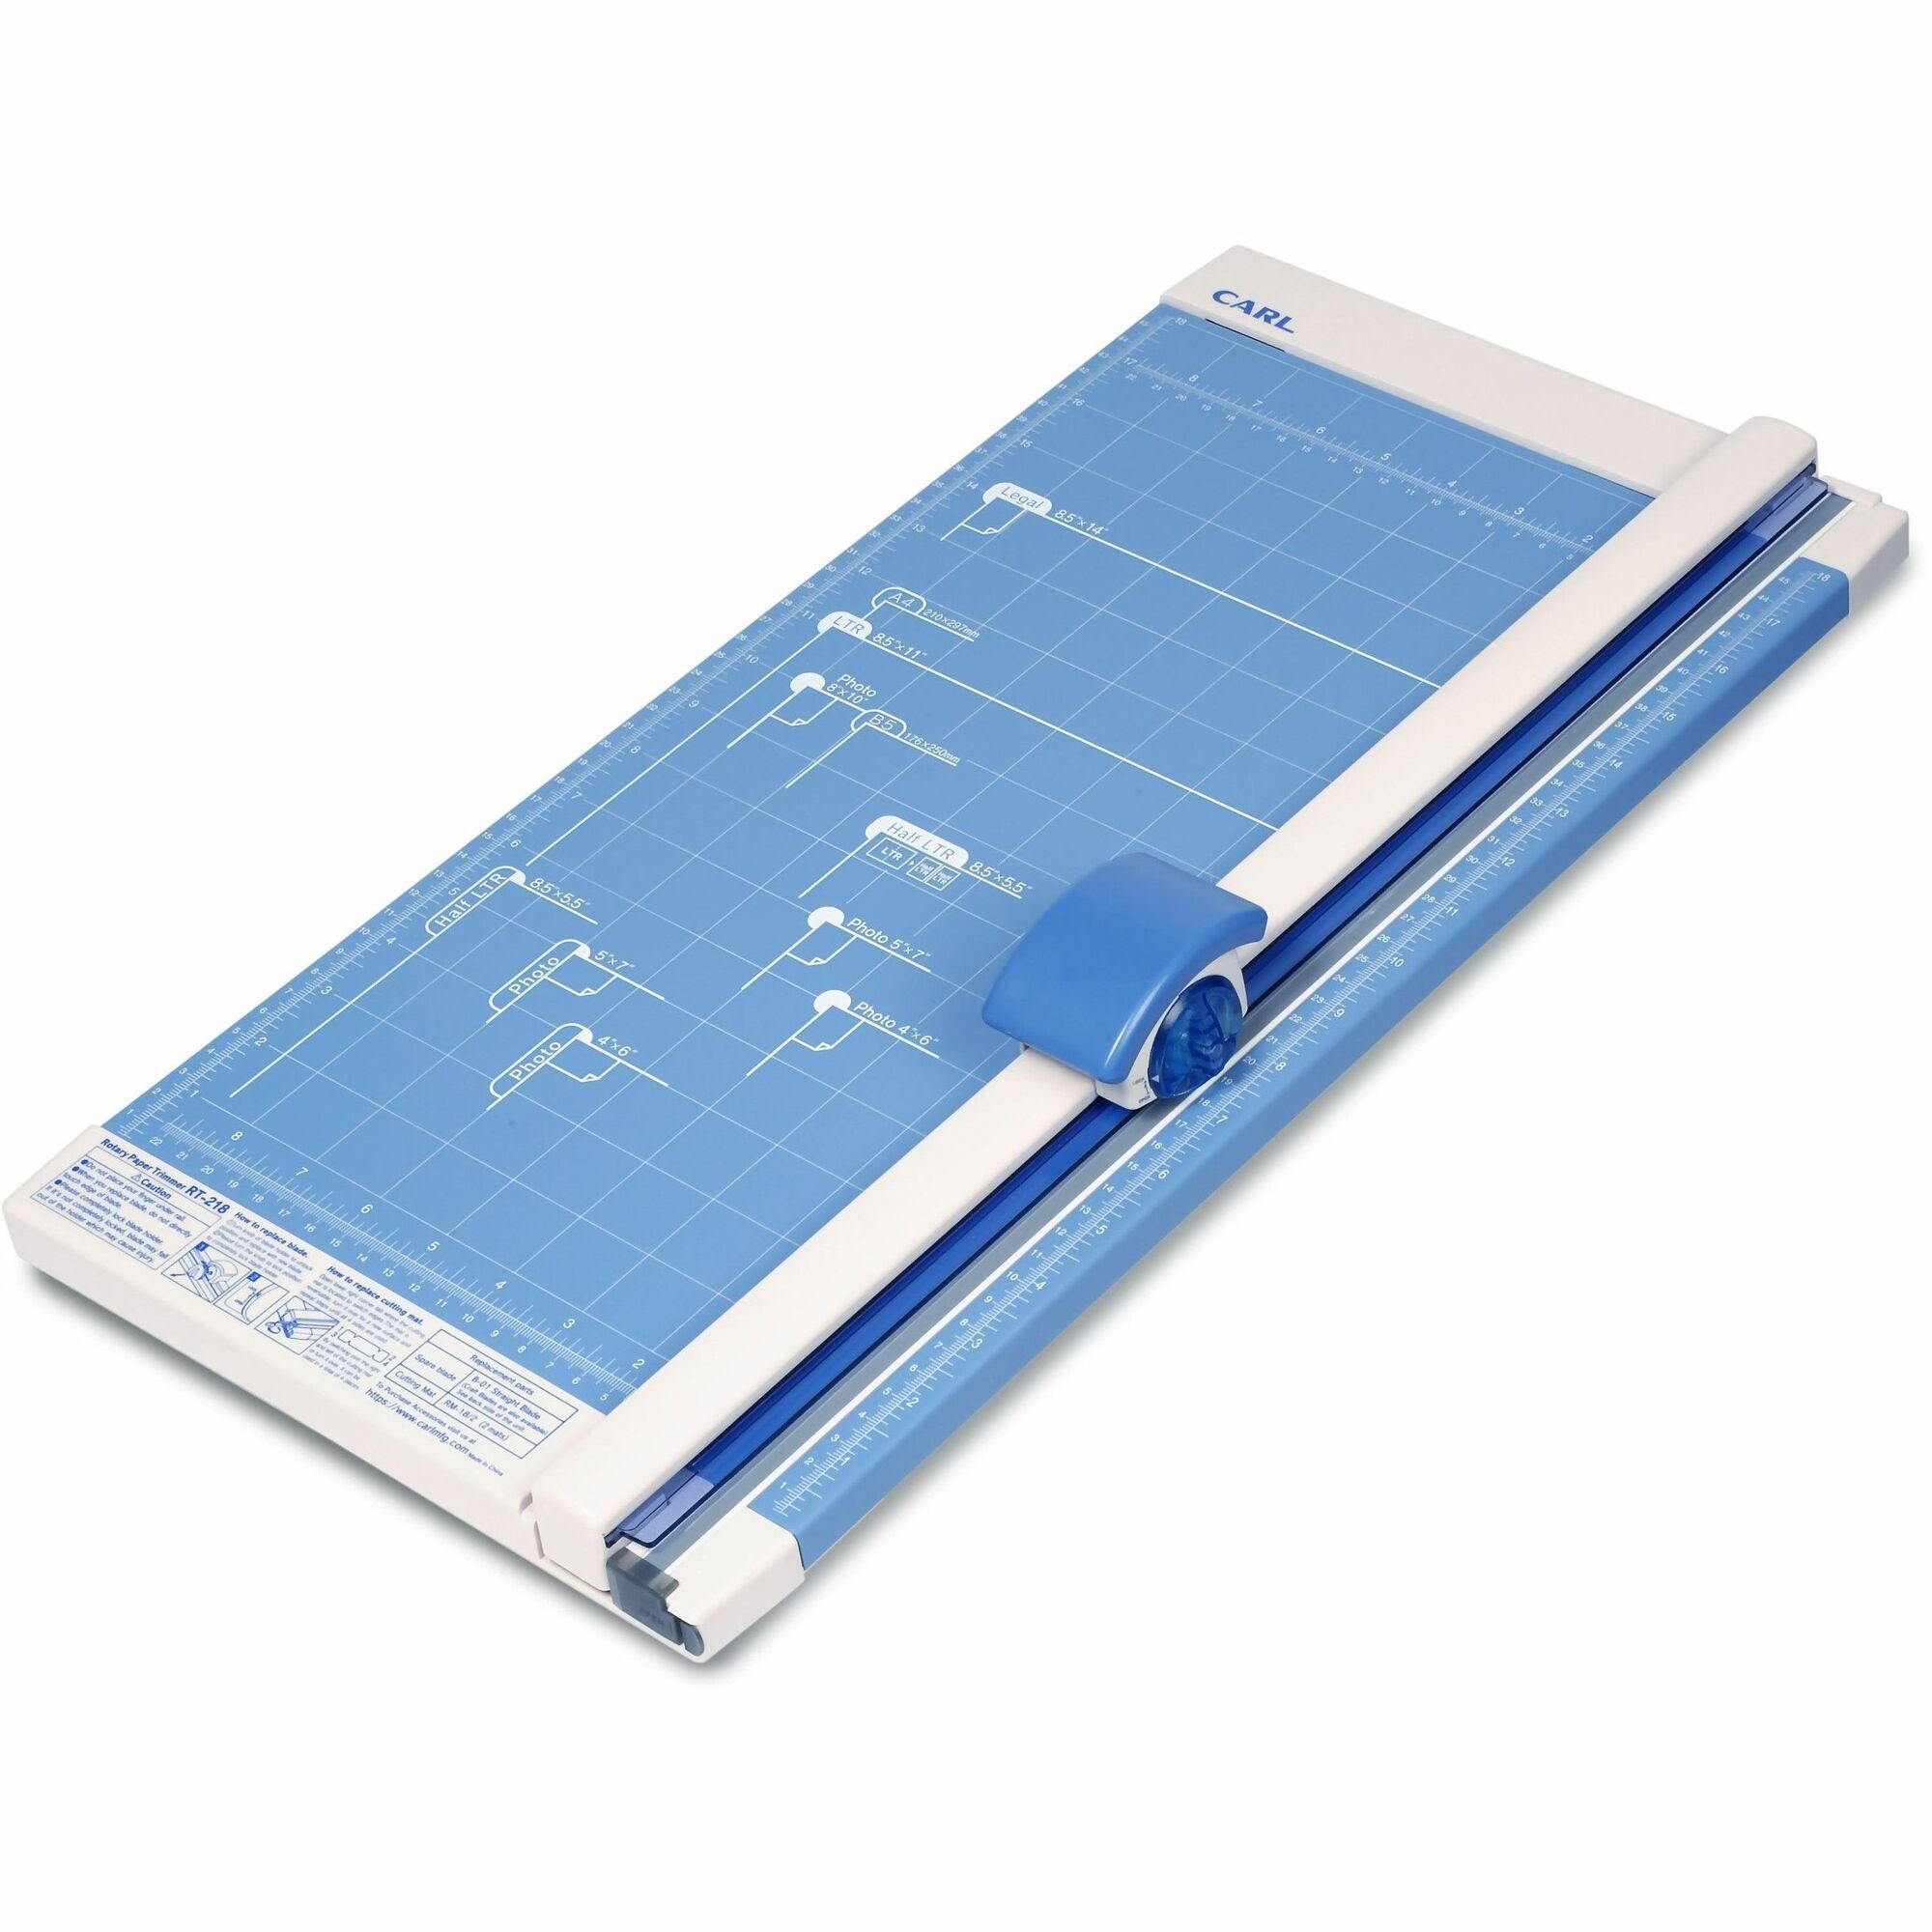 CARL 18" Professional Paper Trimmer - Cuts 10Sheet - 18" Cutting Length - Straight Cutting - 0.8" Height x 10.3" Width x 18" Depth - White